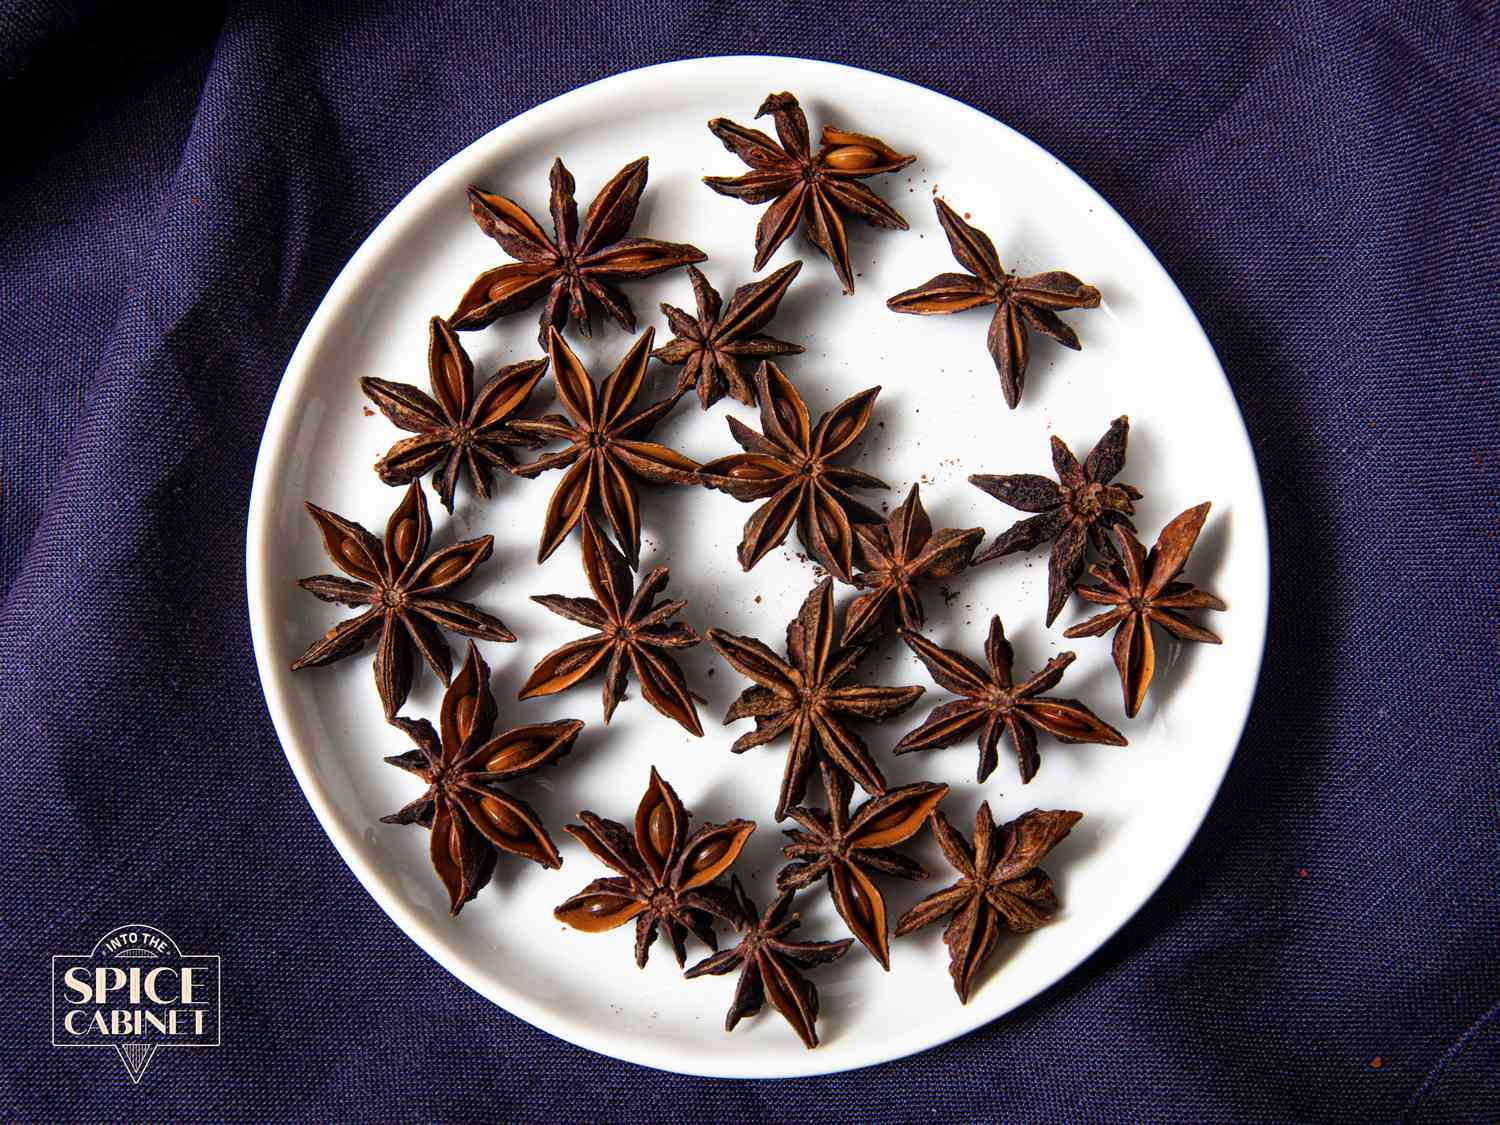 Overhead view of star anise on a plate on a purple background